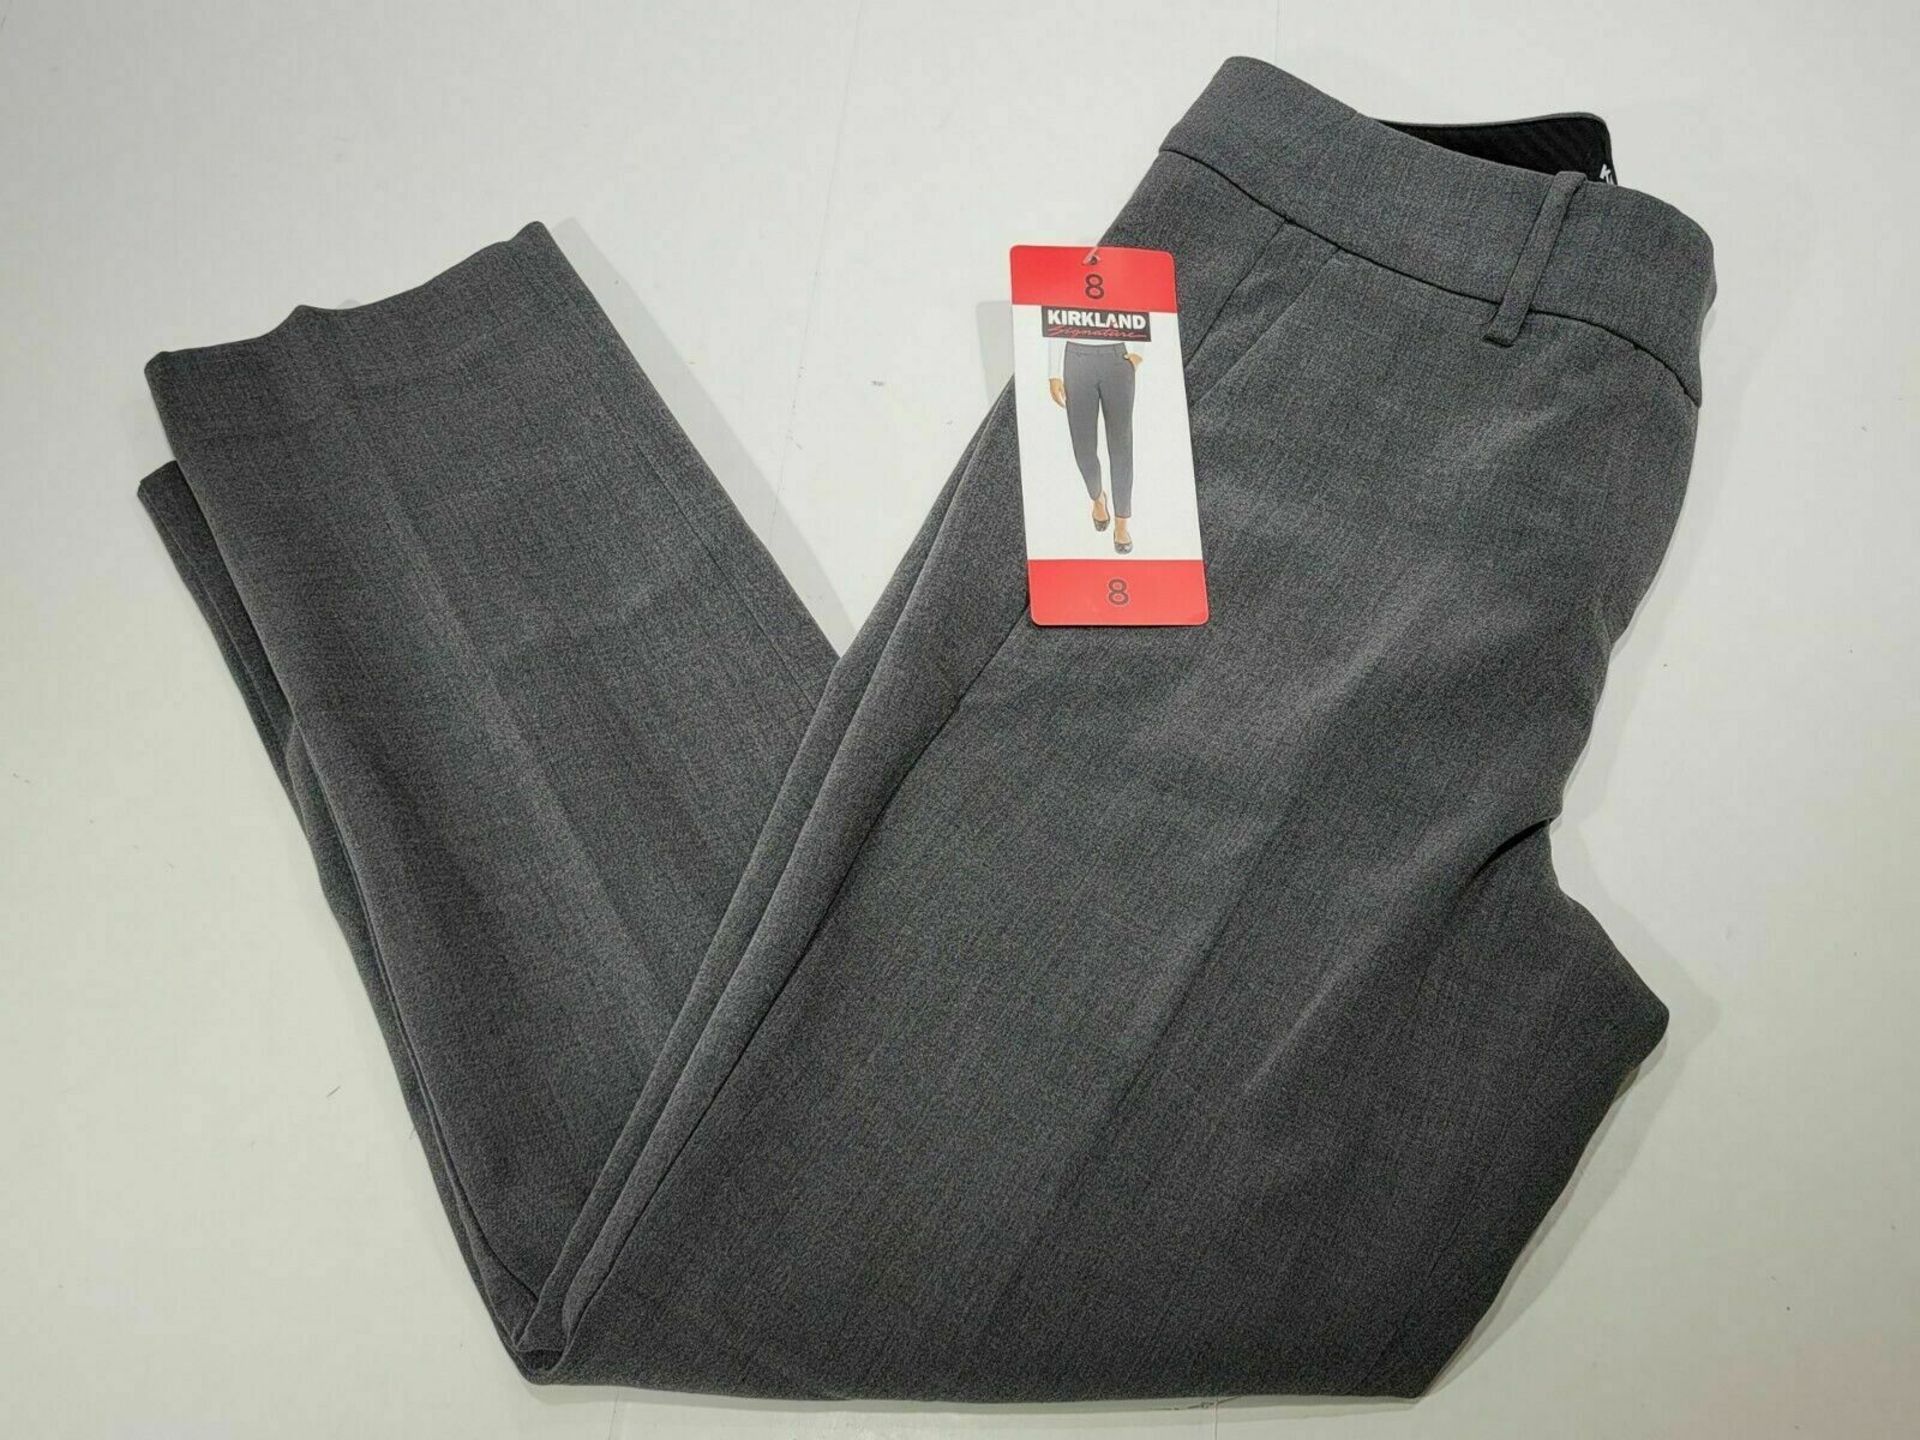 20x Pairs of Kirkland Ladies trousers all brand new - Image 3 of 3